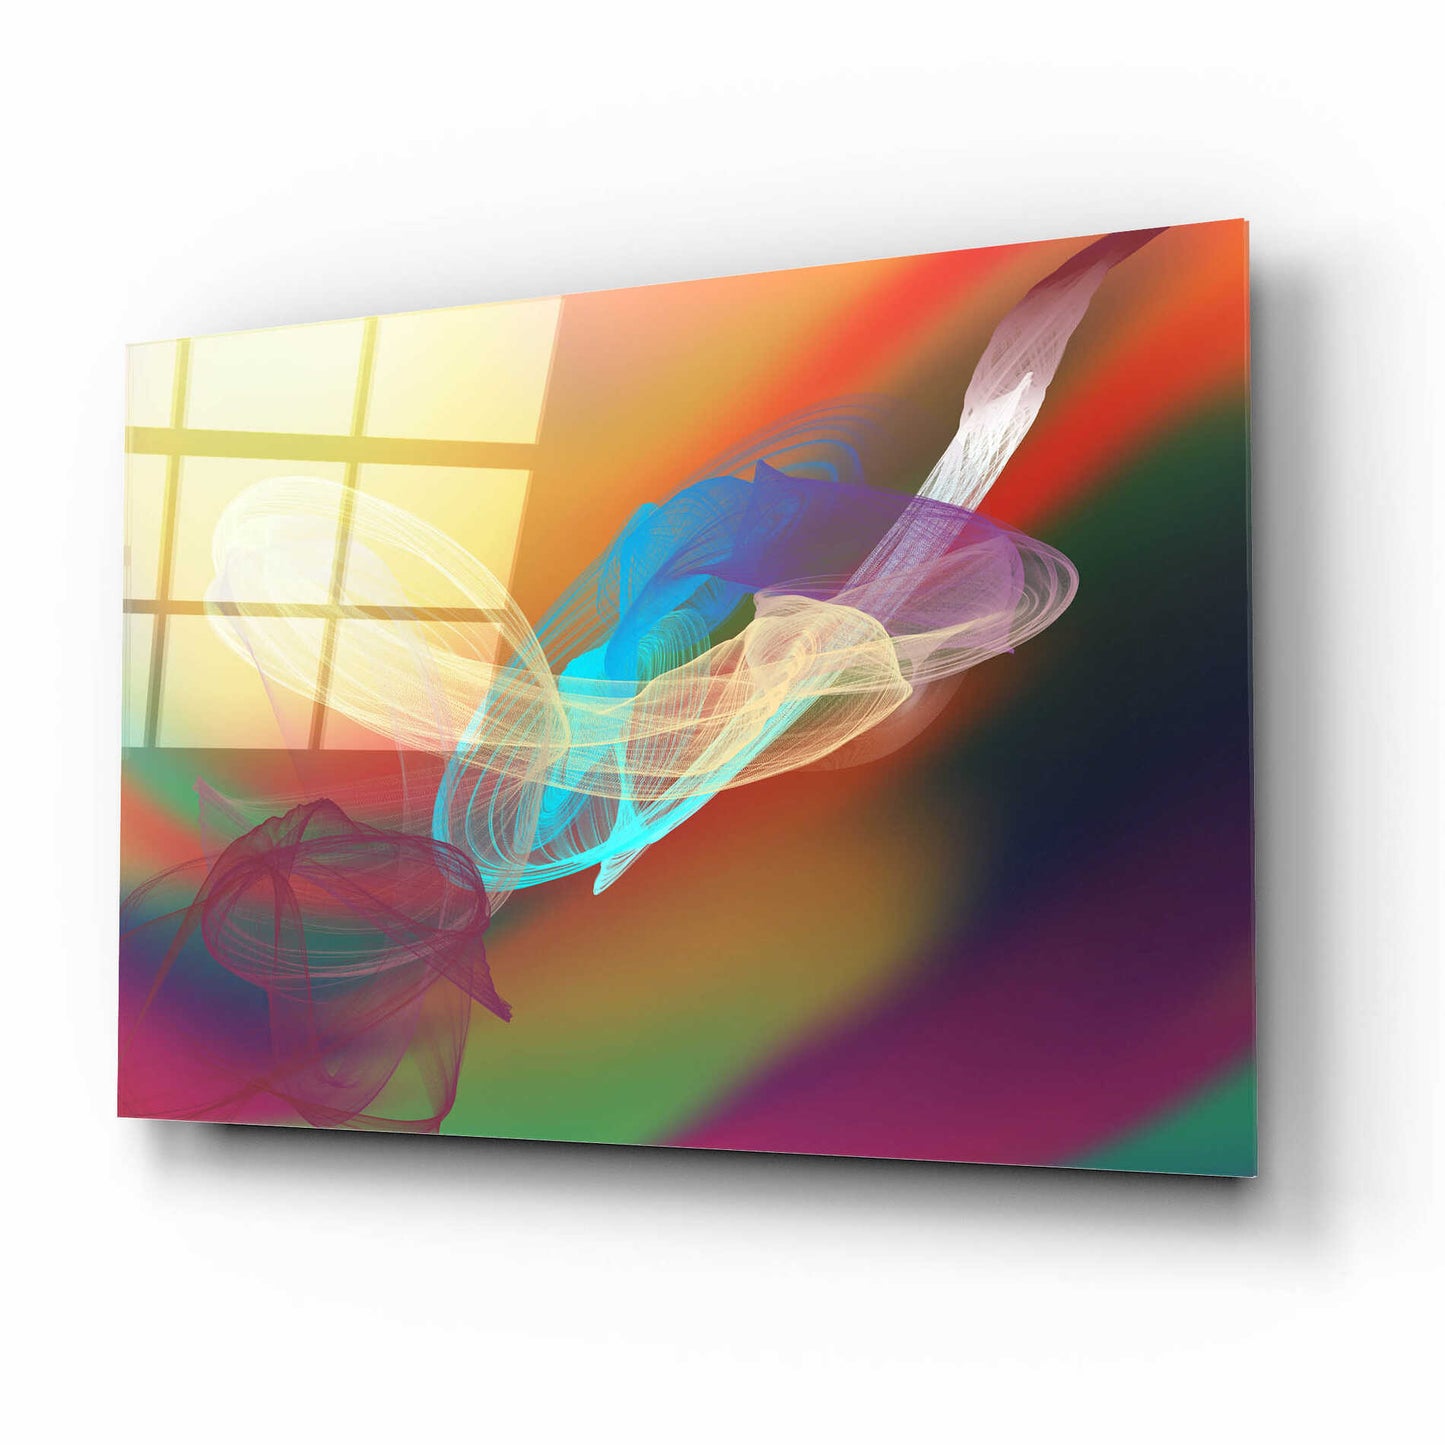 Epic Art 'Inverted Color In The Lines 6' by Irena Orlov Acrylic Glass Wall Art,16x12